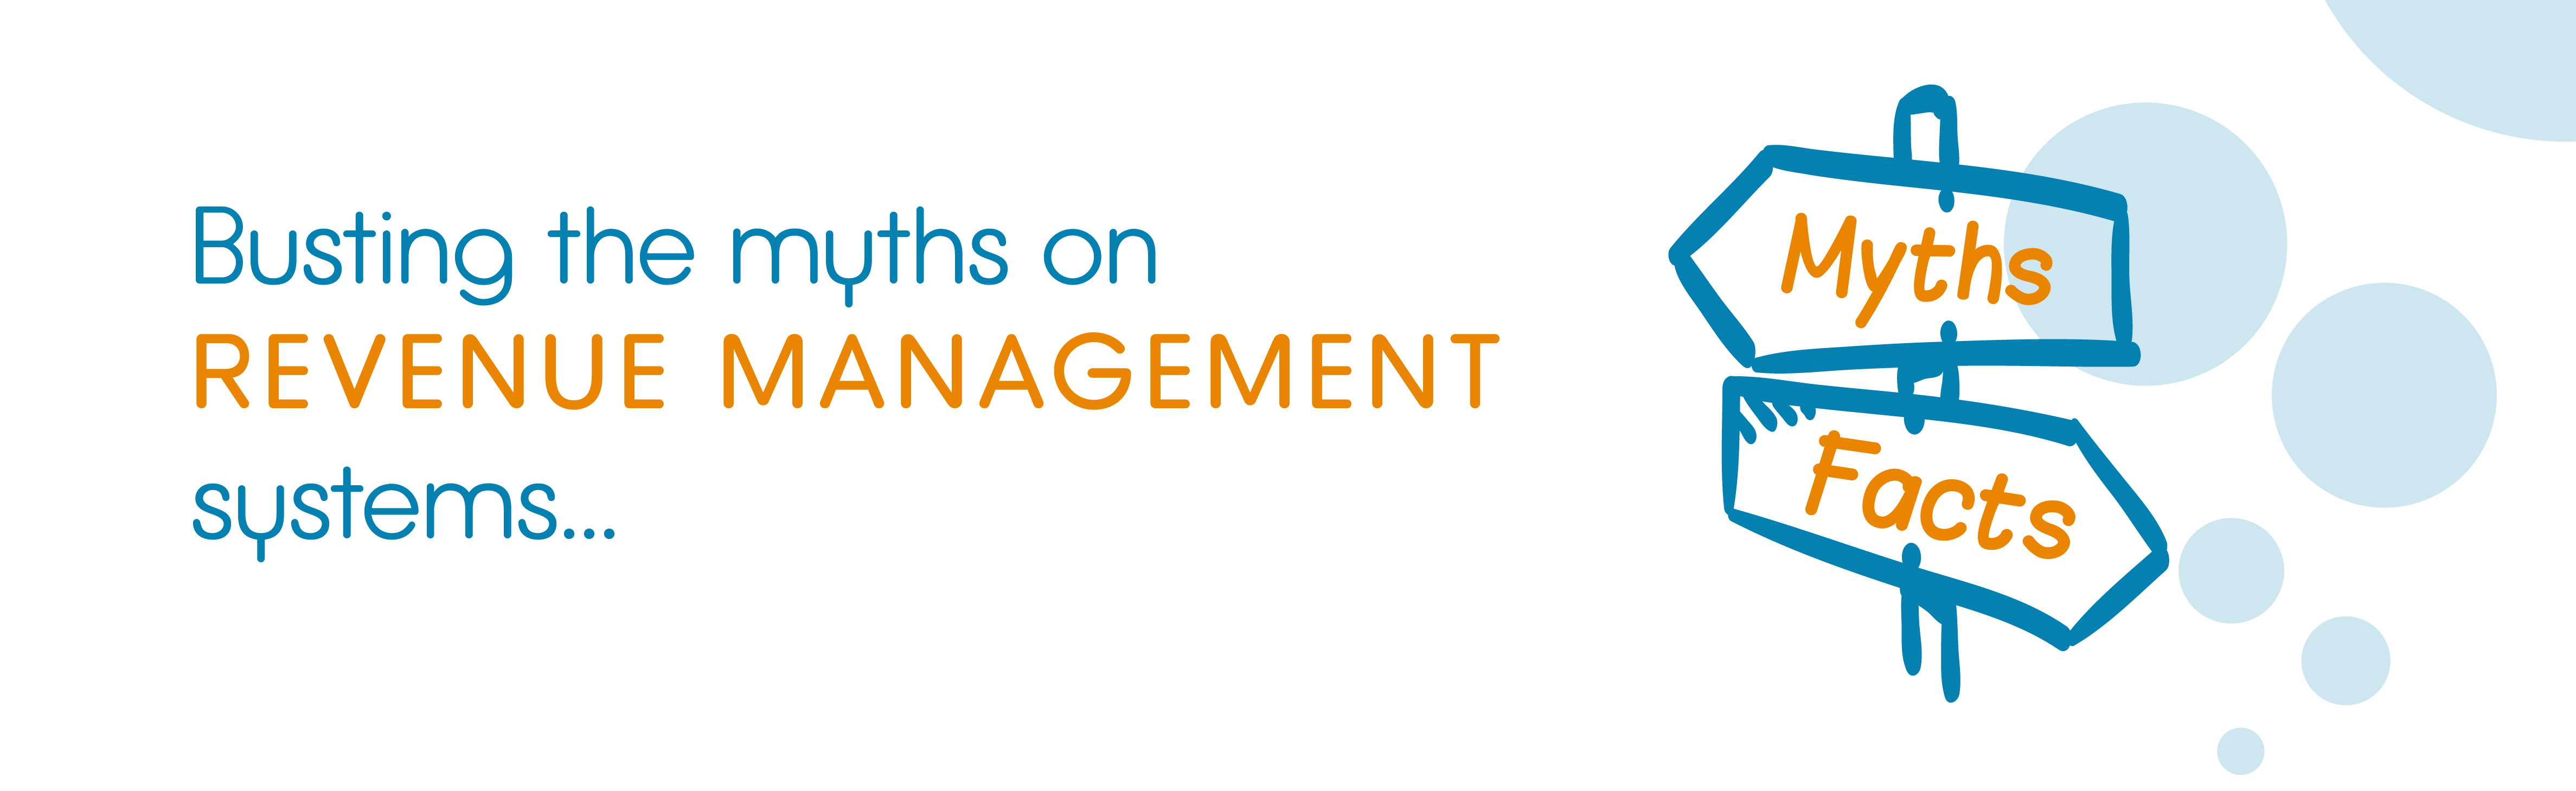 myths_and_facts_about_revenue_management_systems